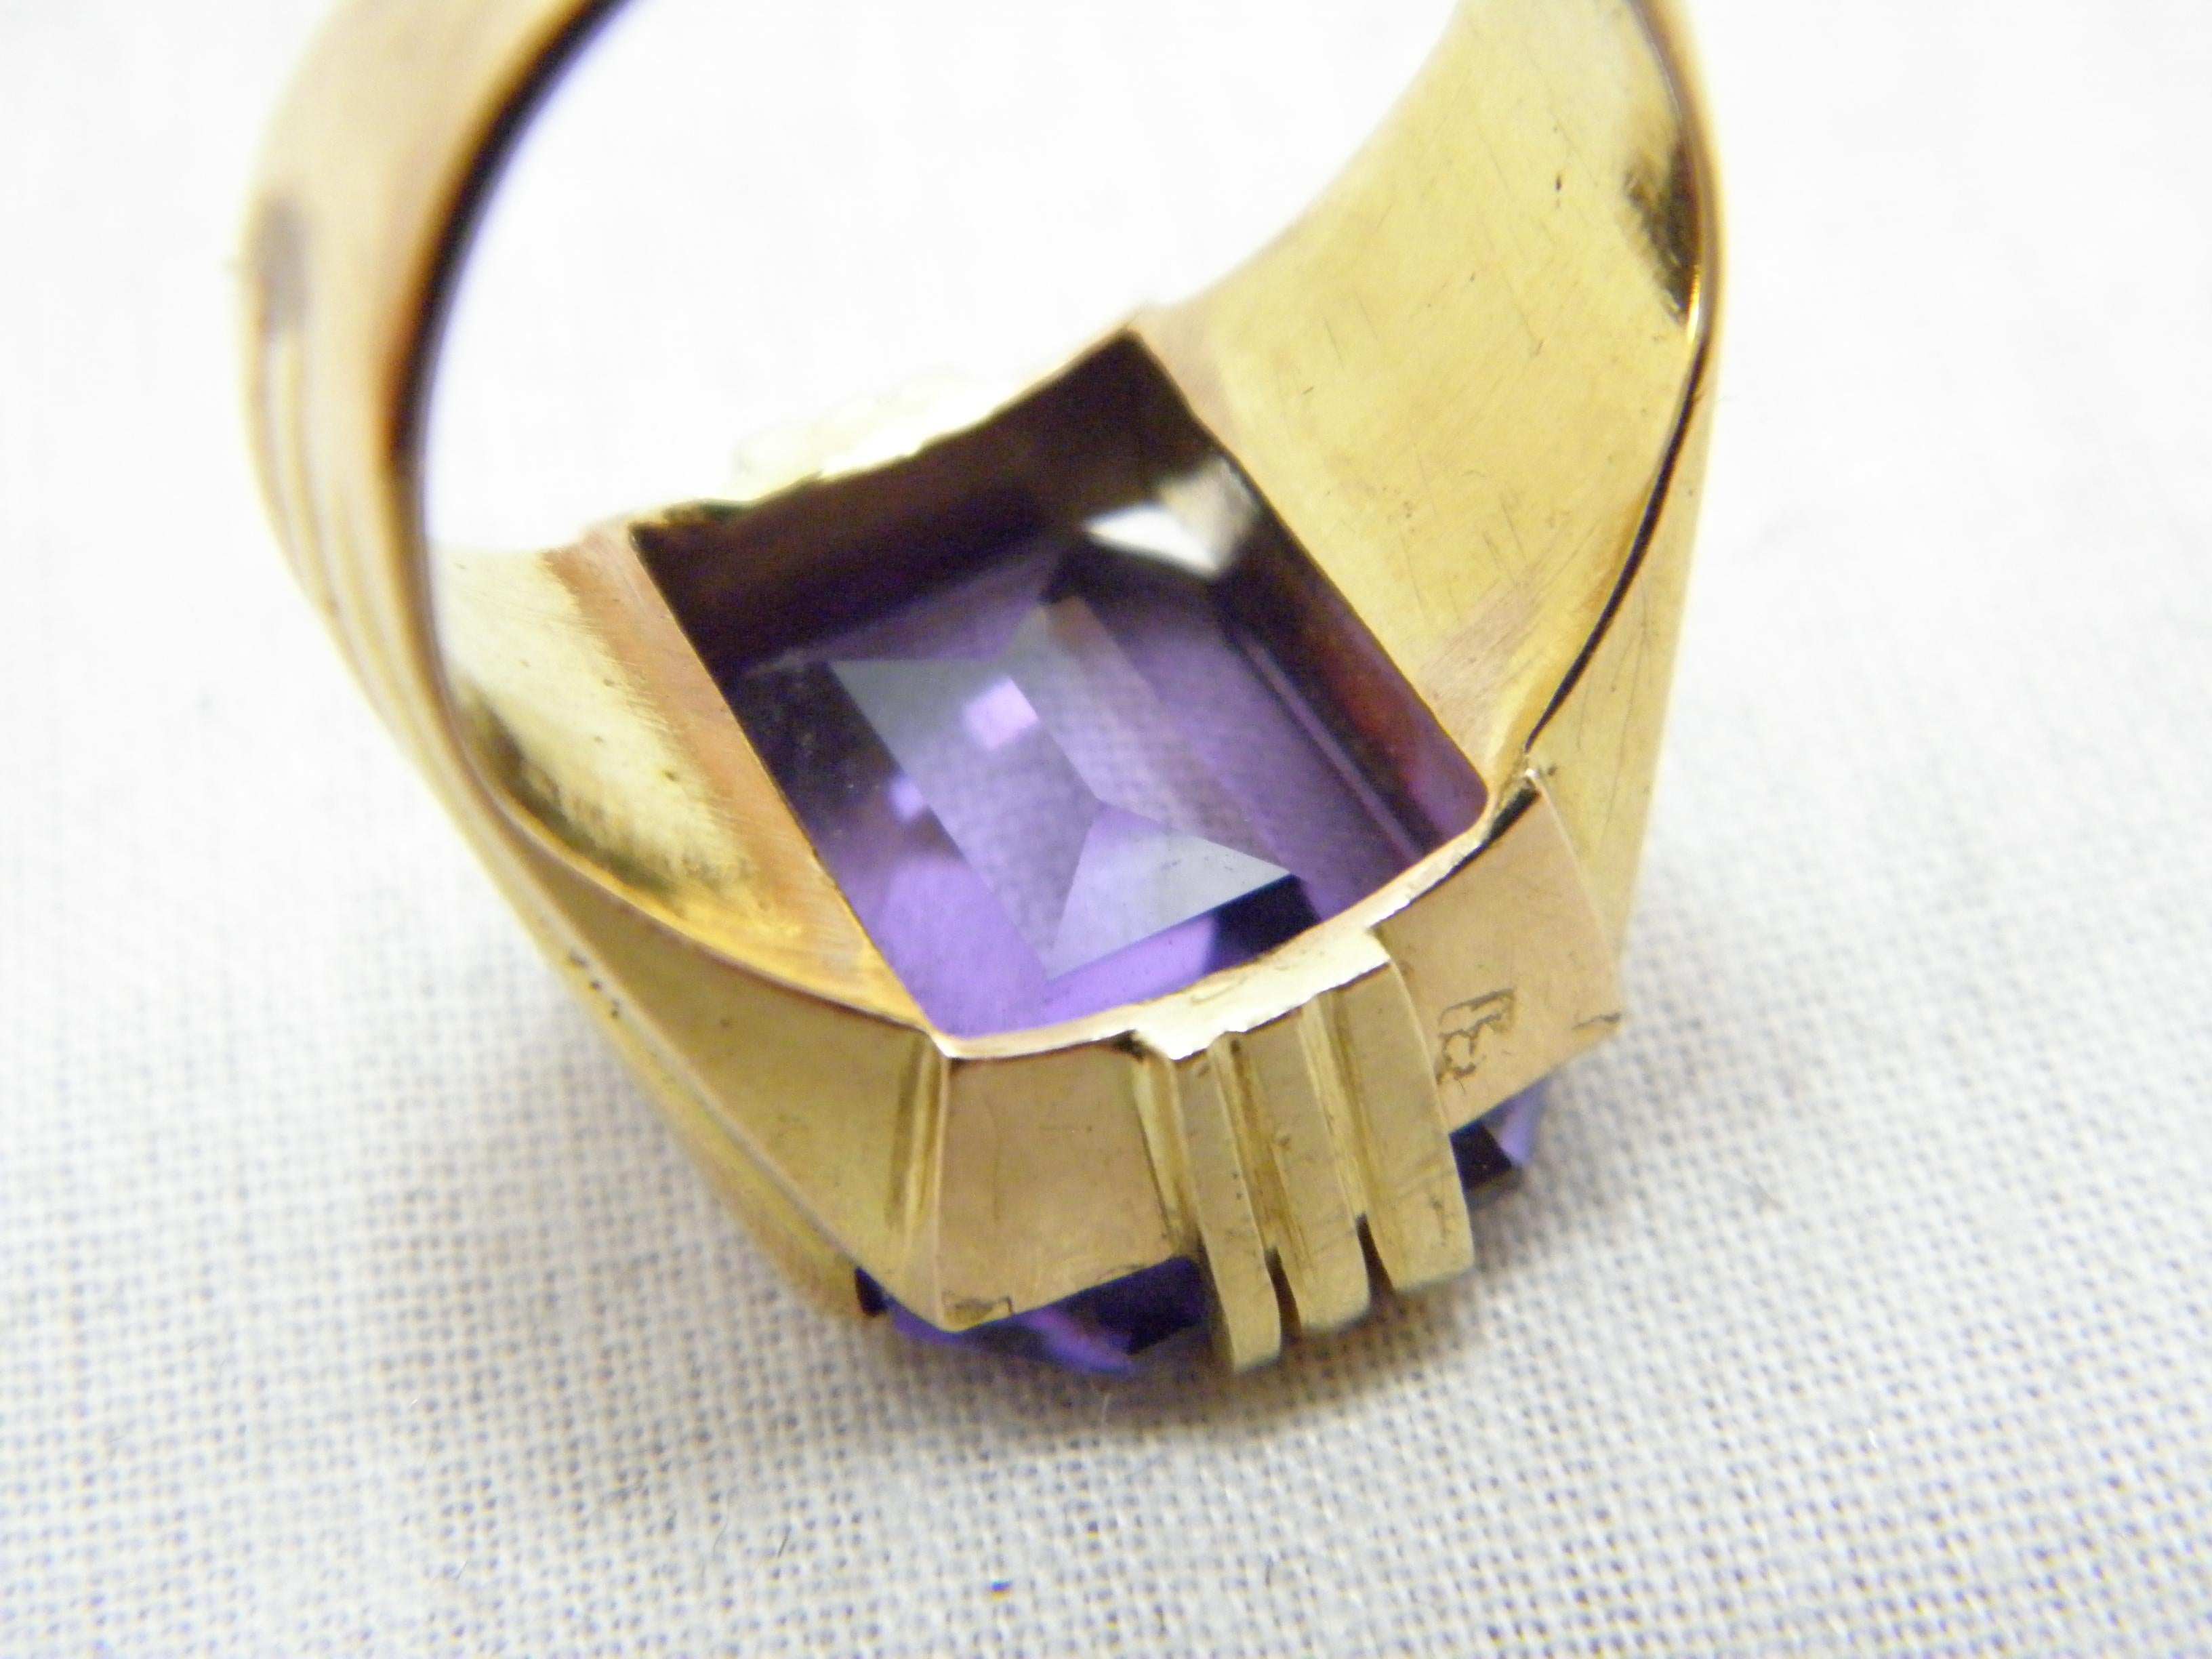 Vintage Alexandrite 18ct Gold Statement Signet Ring Size P 7.75 750 Purity Heavy 2